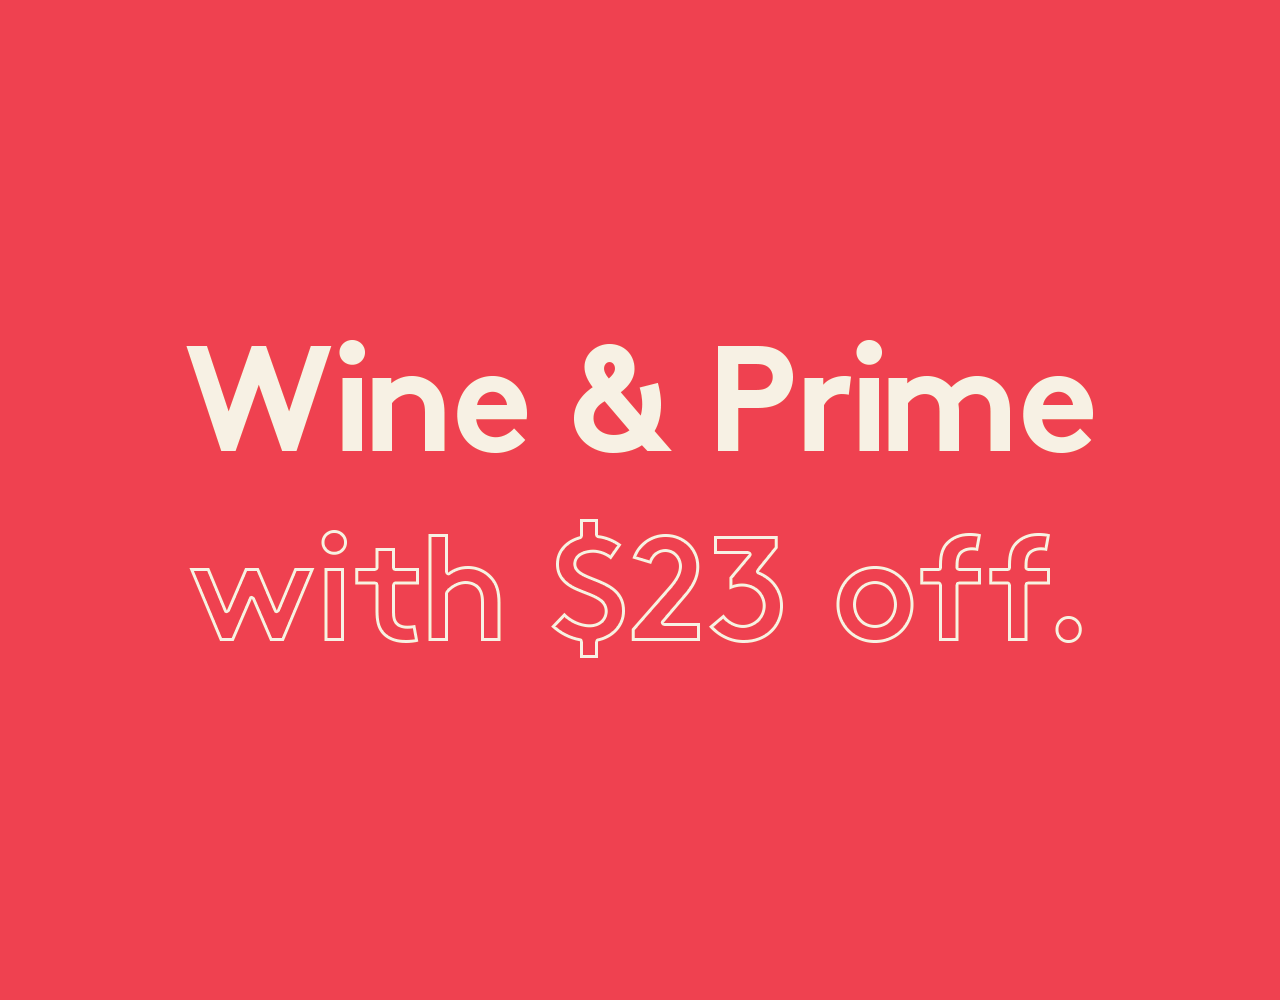 Wine & Prime with $23 off.